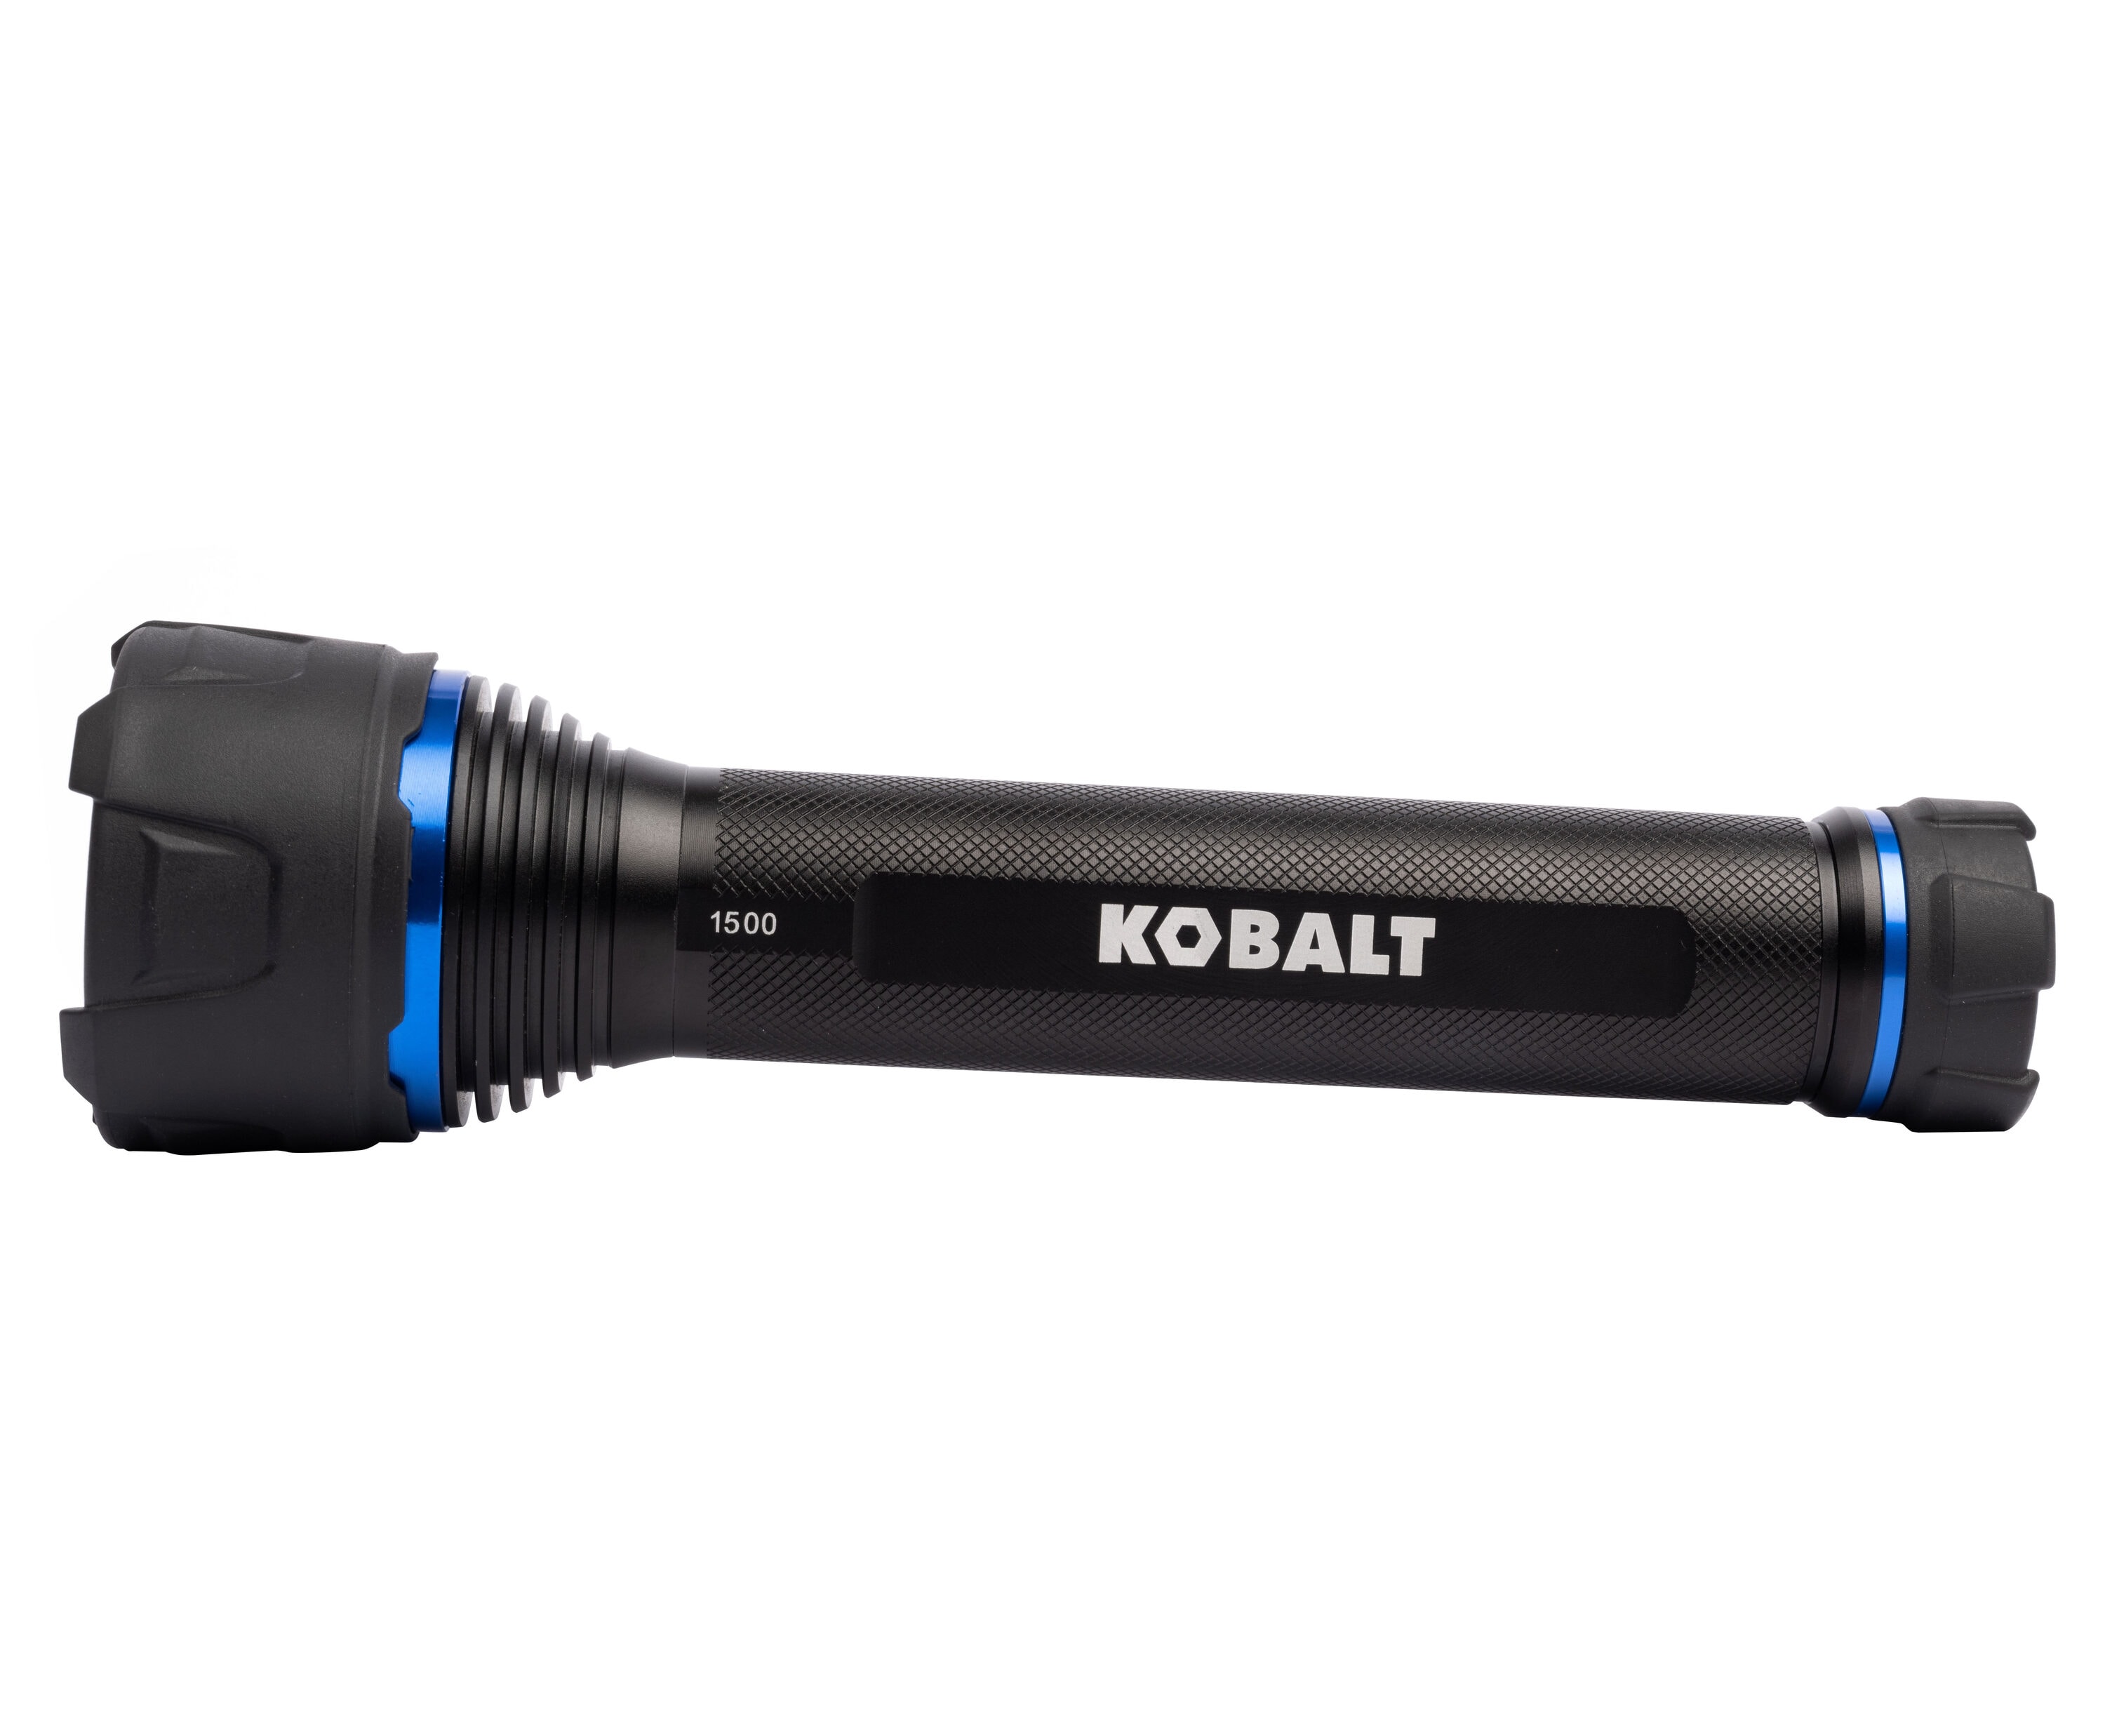 Kobalt Virtually Indestructible Waterproof 1500-Lumen LED Modes in Flashlight the Flashlights 3 Spotlight department Included) (AA Battery at